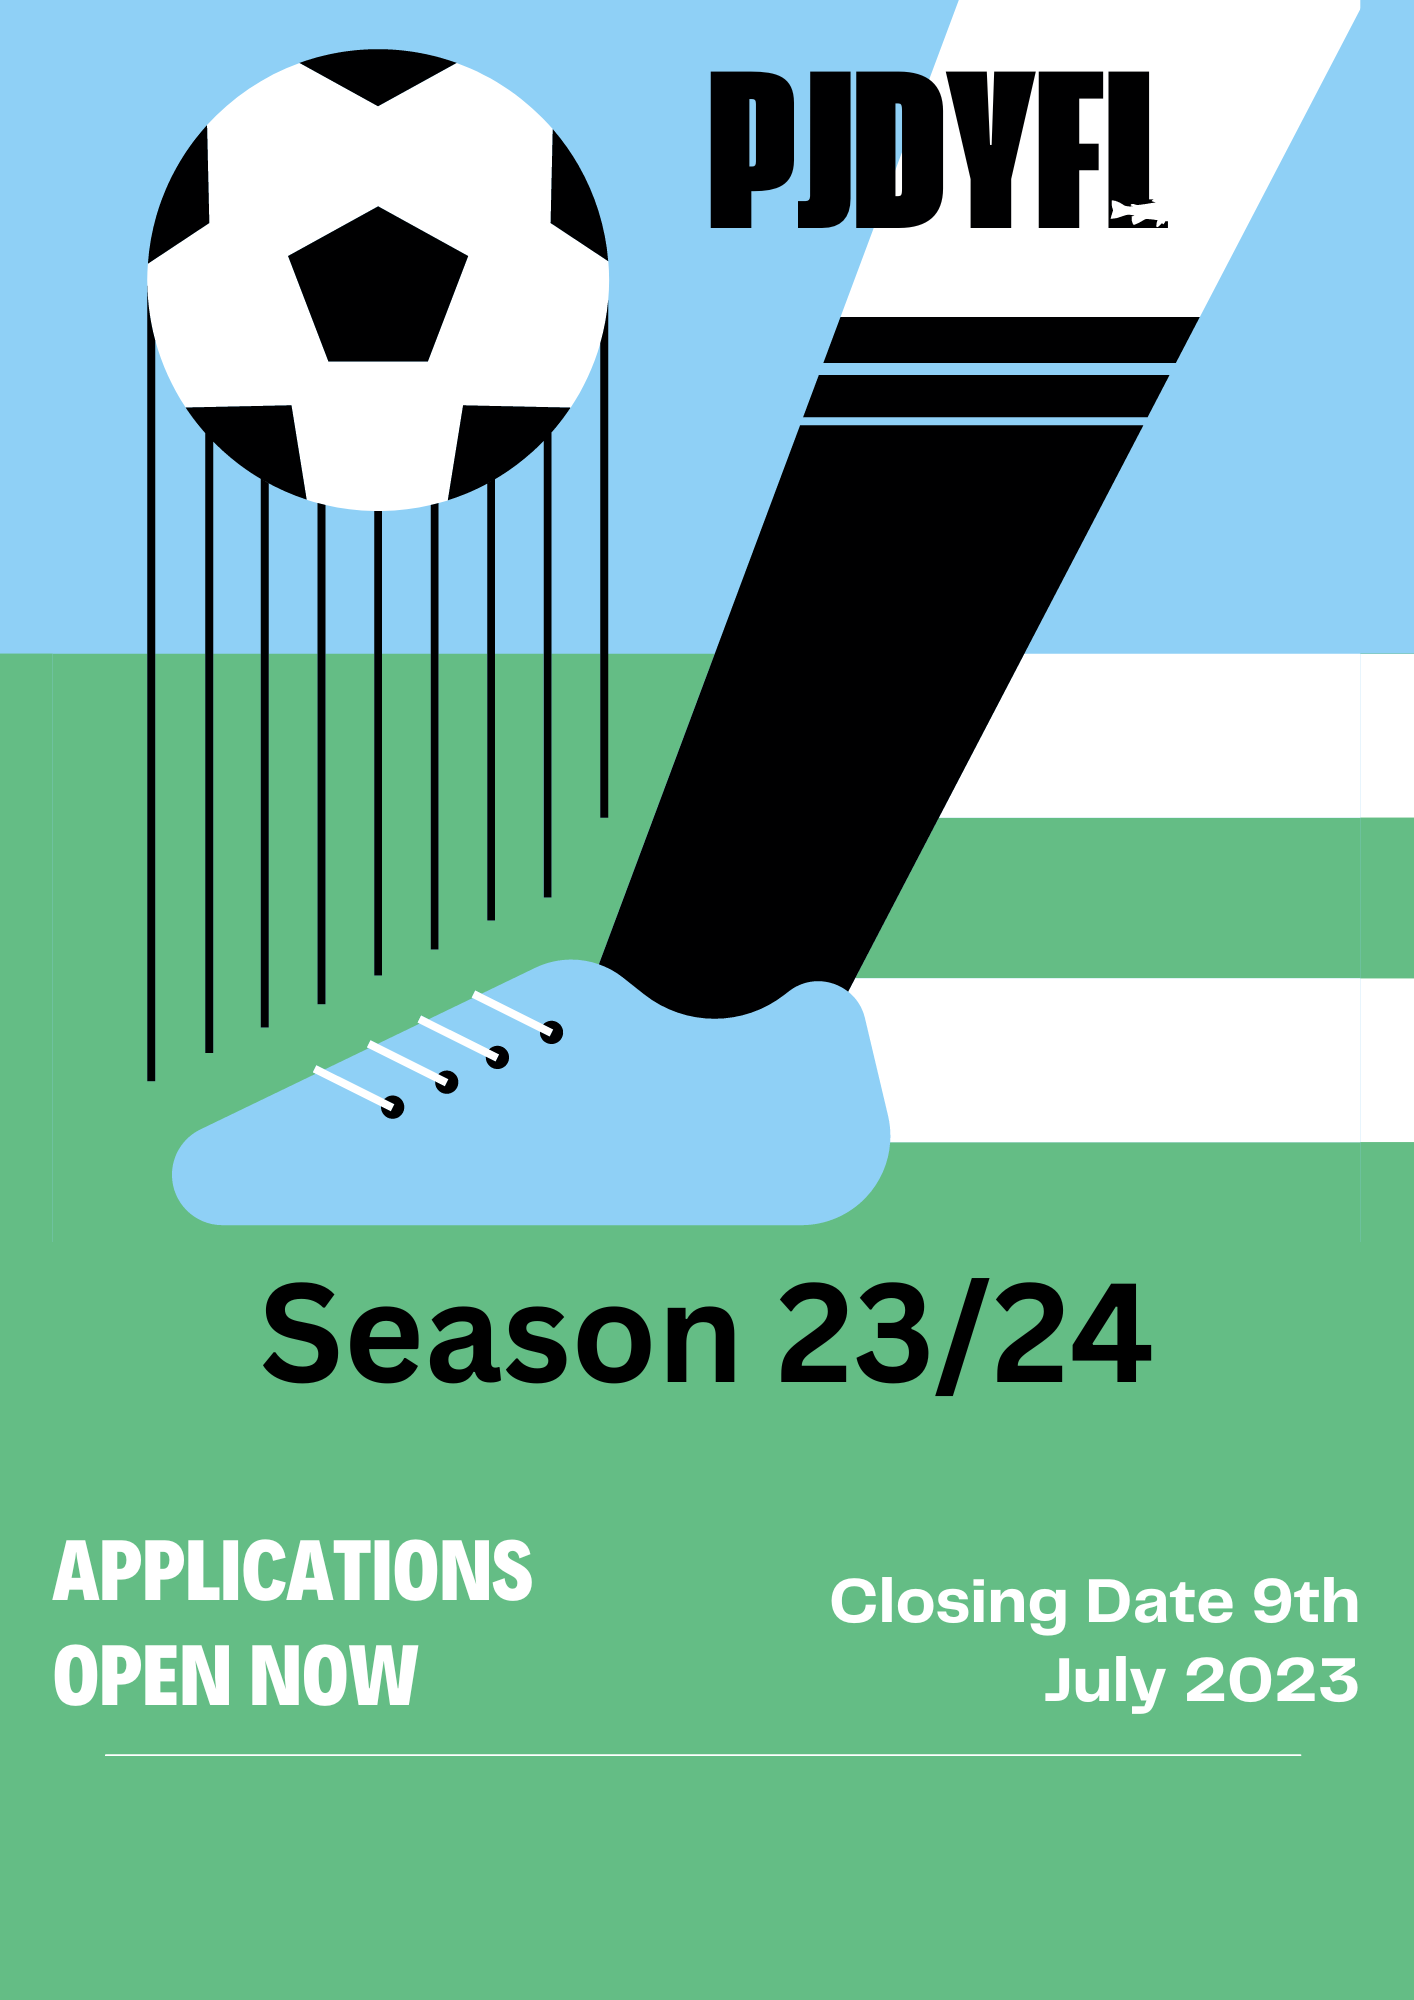 11 Aside applications now open !!!